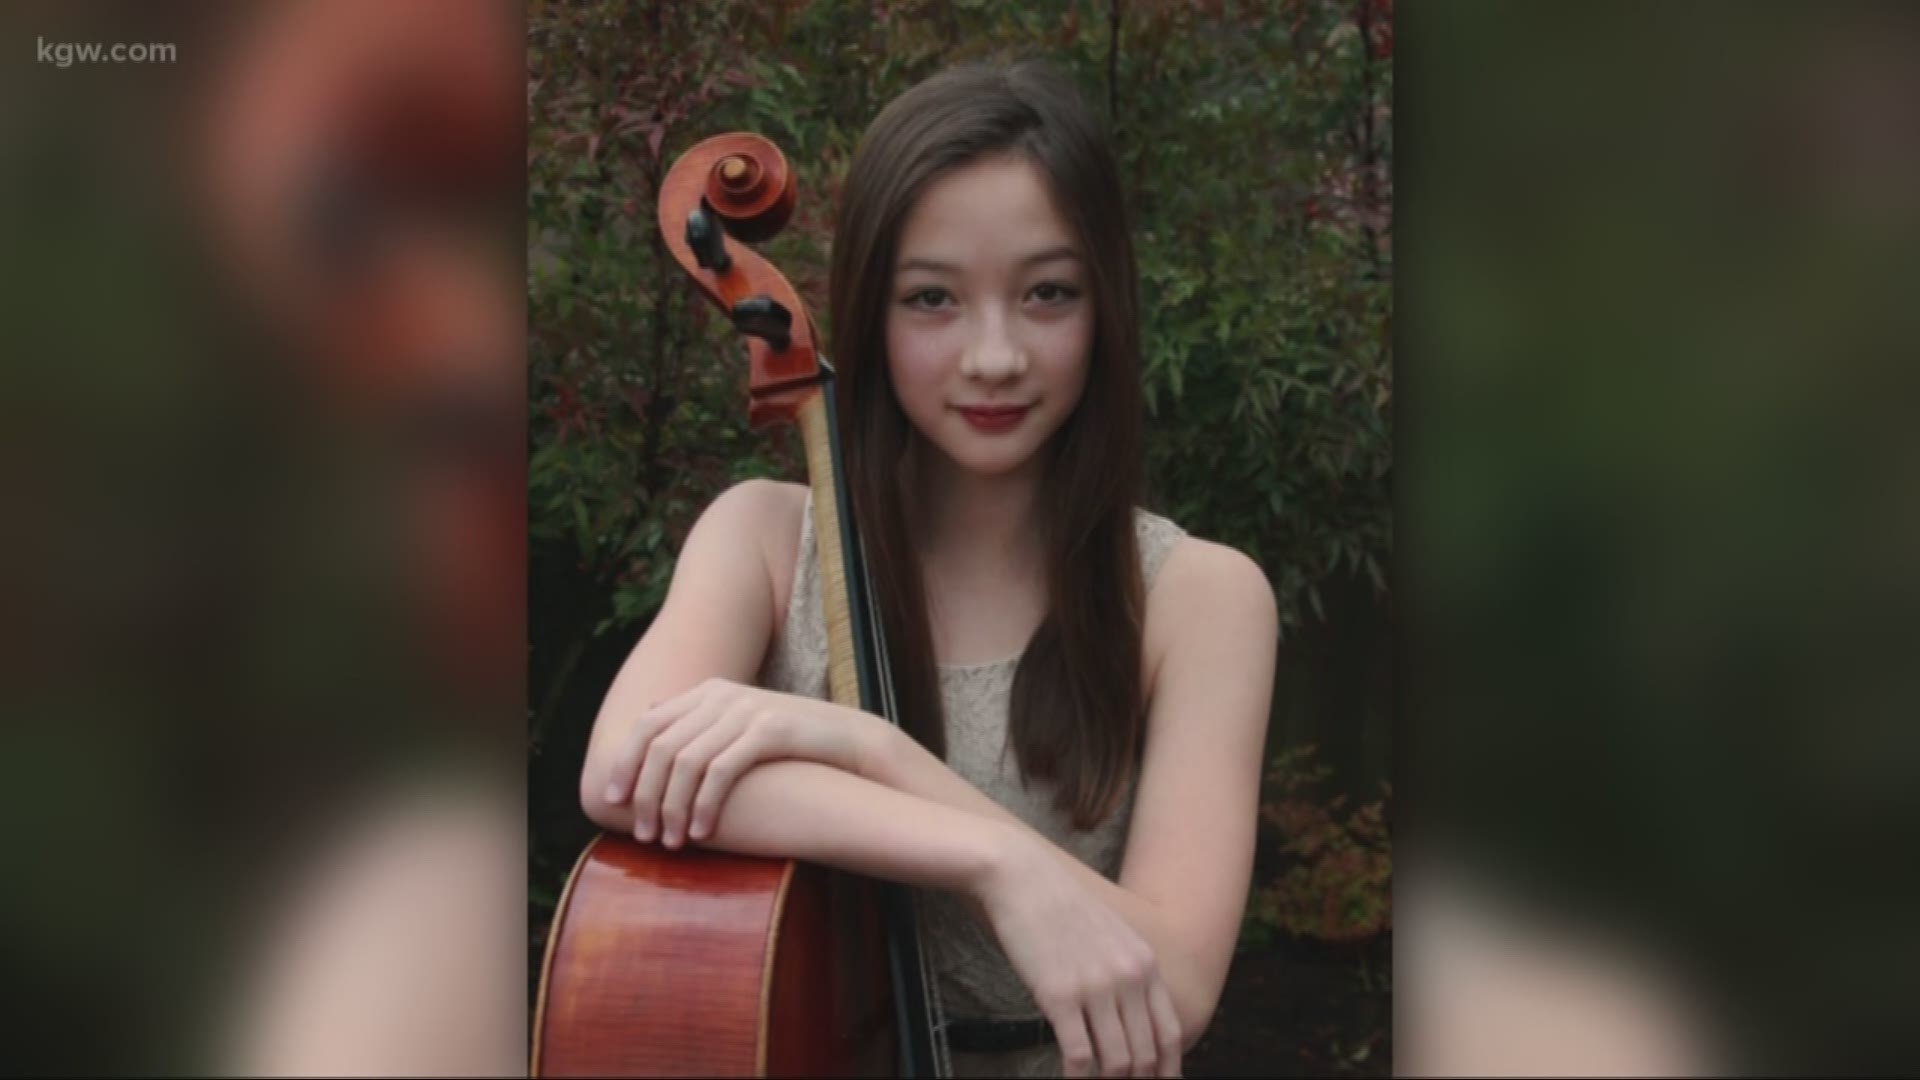 Kira Wang of Portland is one of 24 cellists acknowledging difficult times but giving hope through 'The Swan Project.'